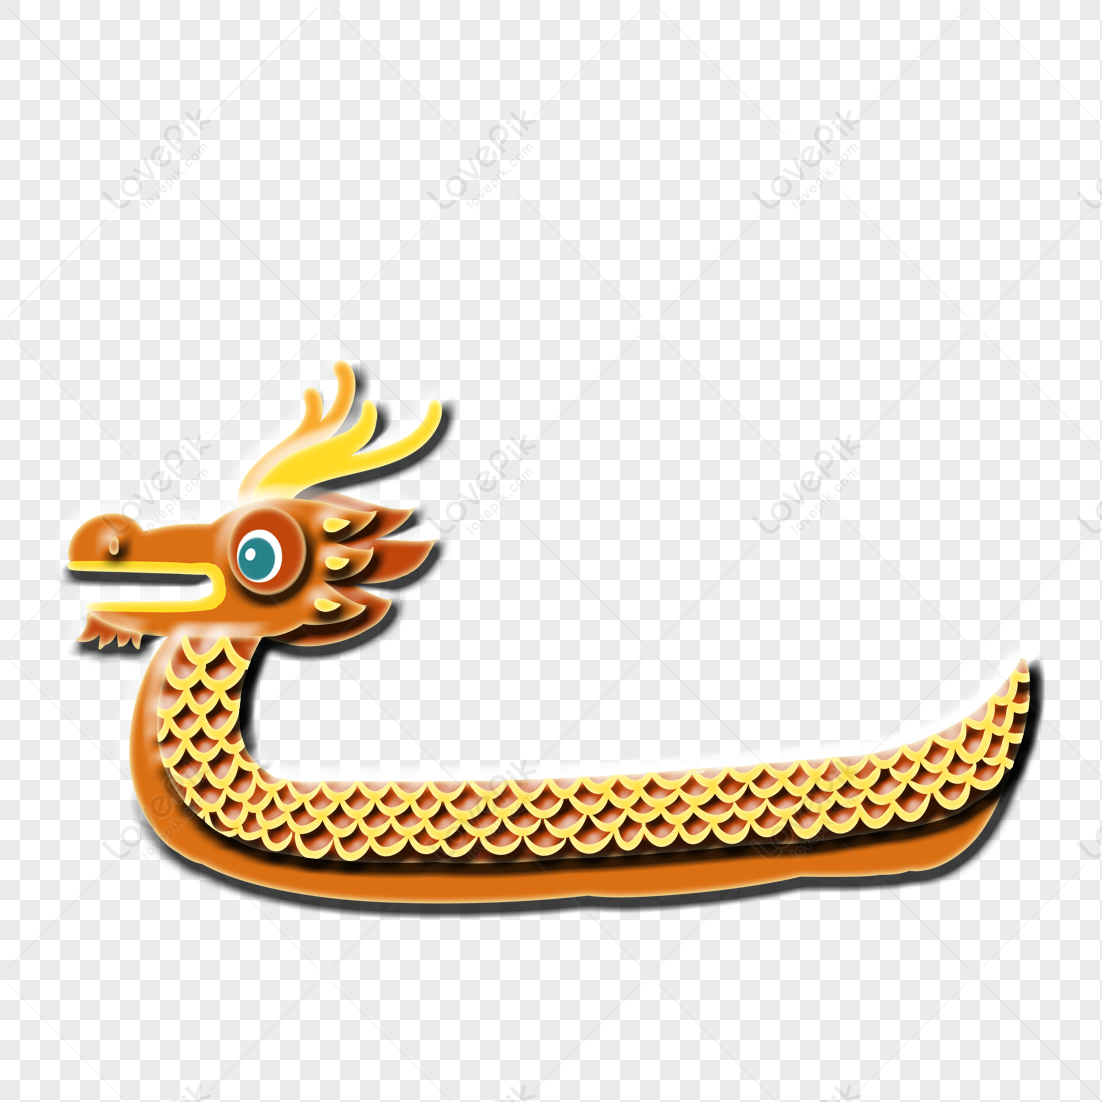 Dragon Boat Festival Dragon Boat Festival material, dragon icon, chinese dragon, art icon png picture